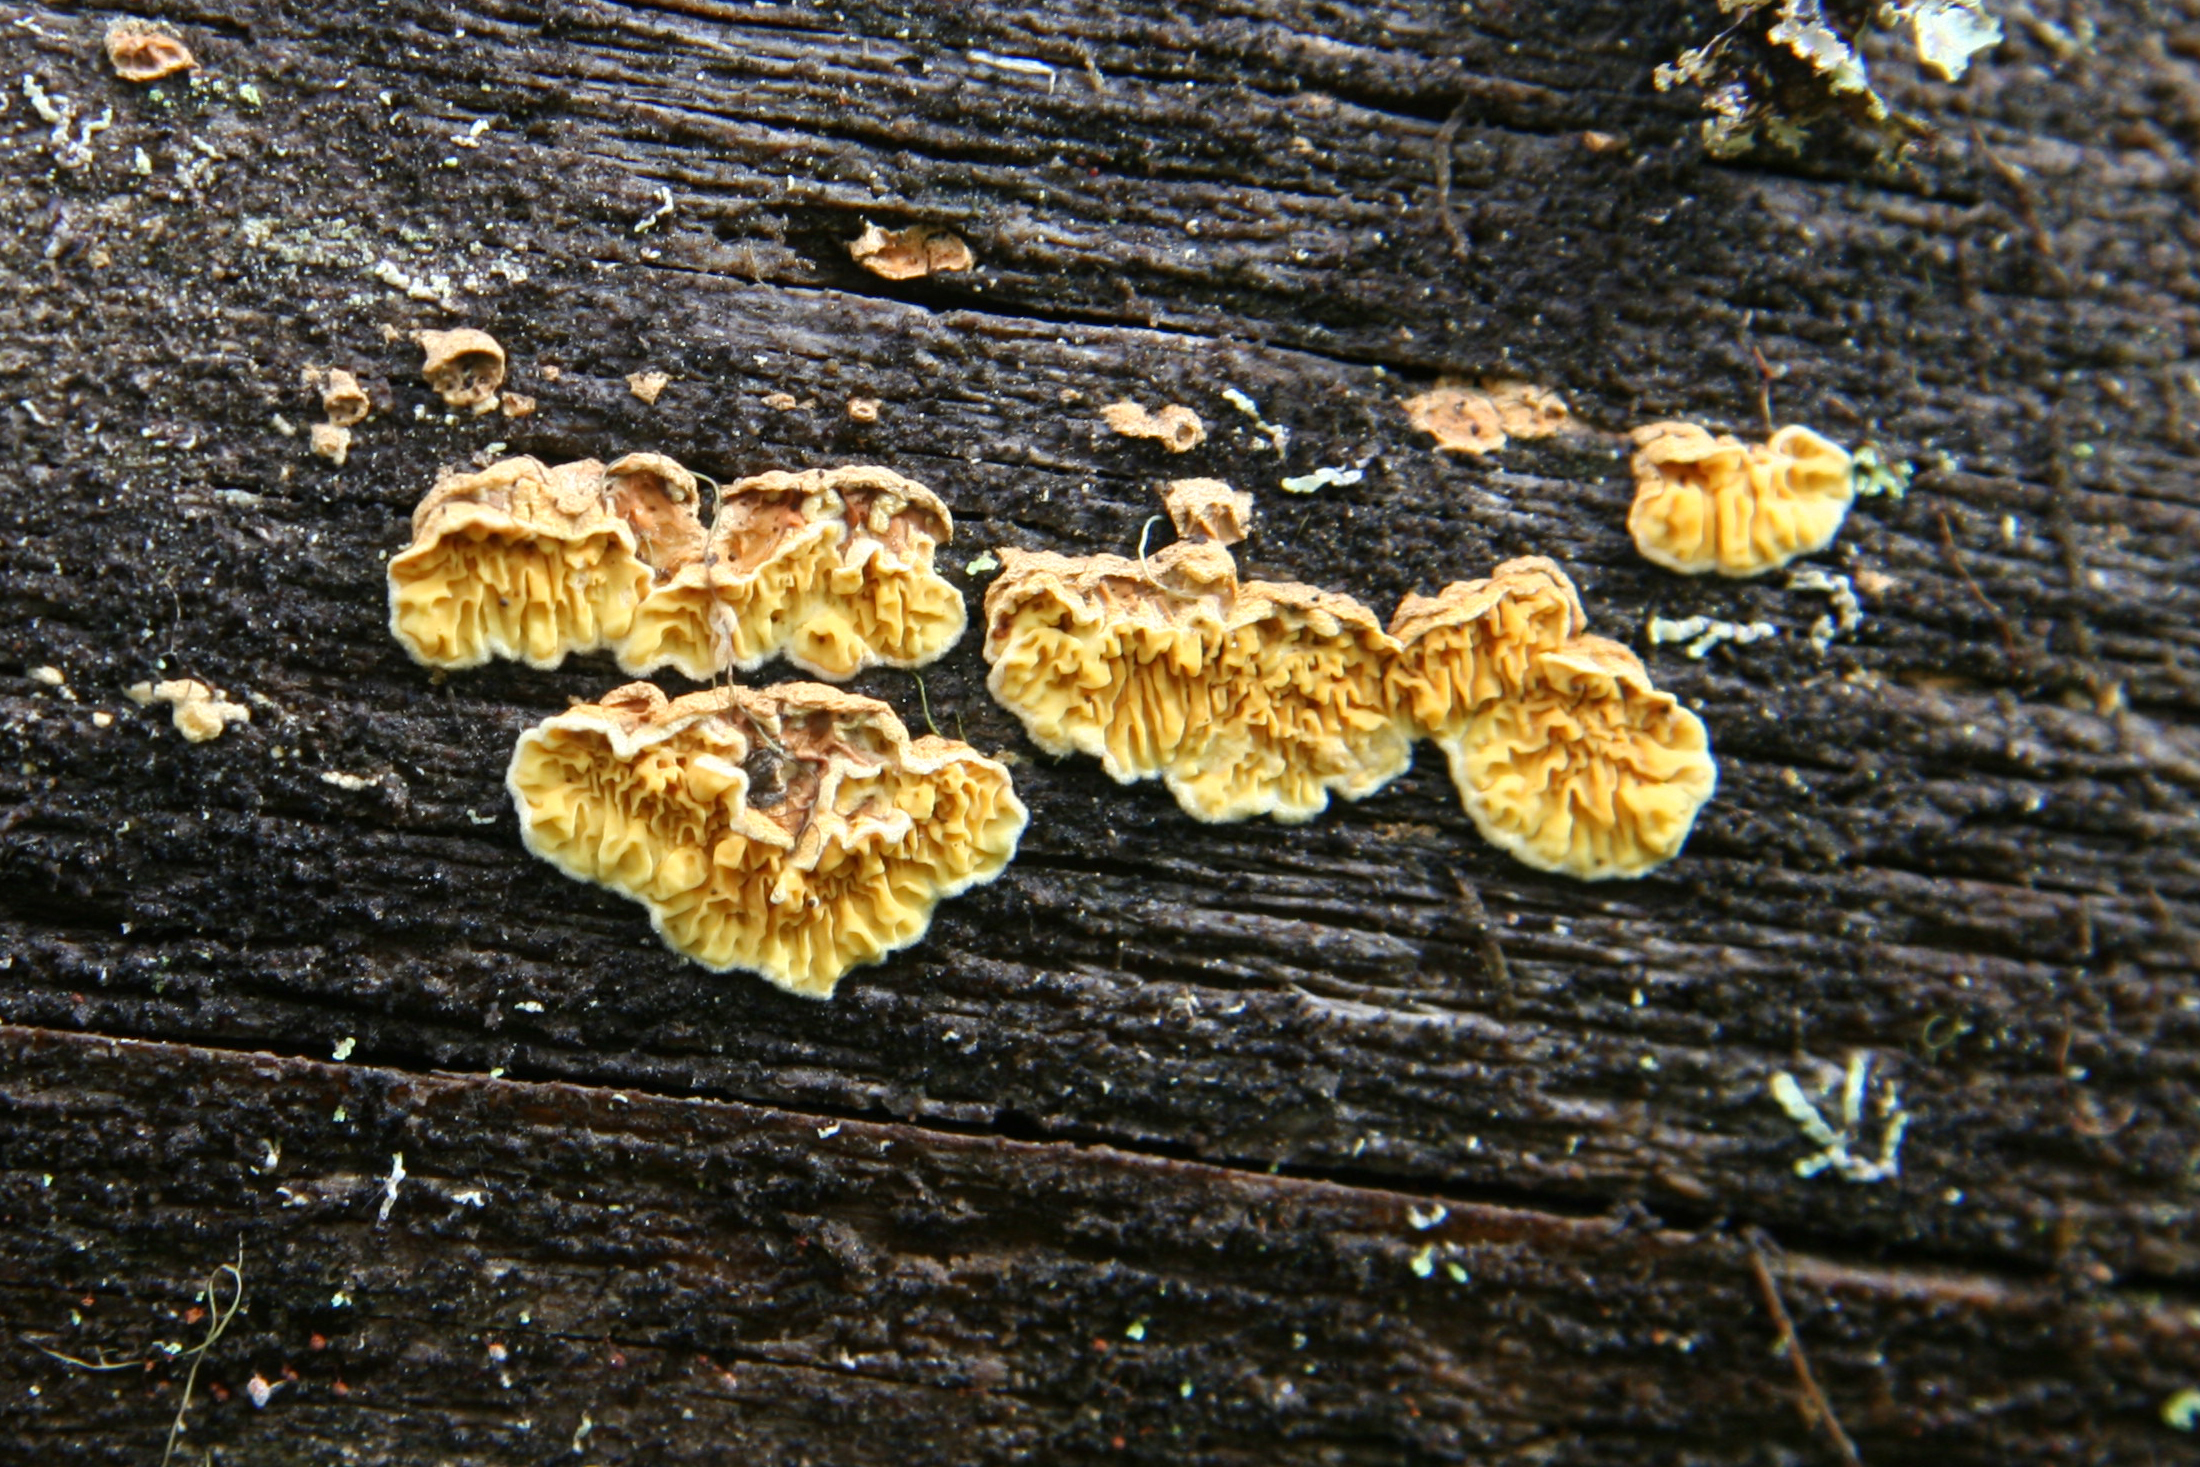 several small yellow mushrooms that are sitting on a wooden surface